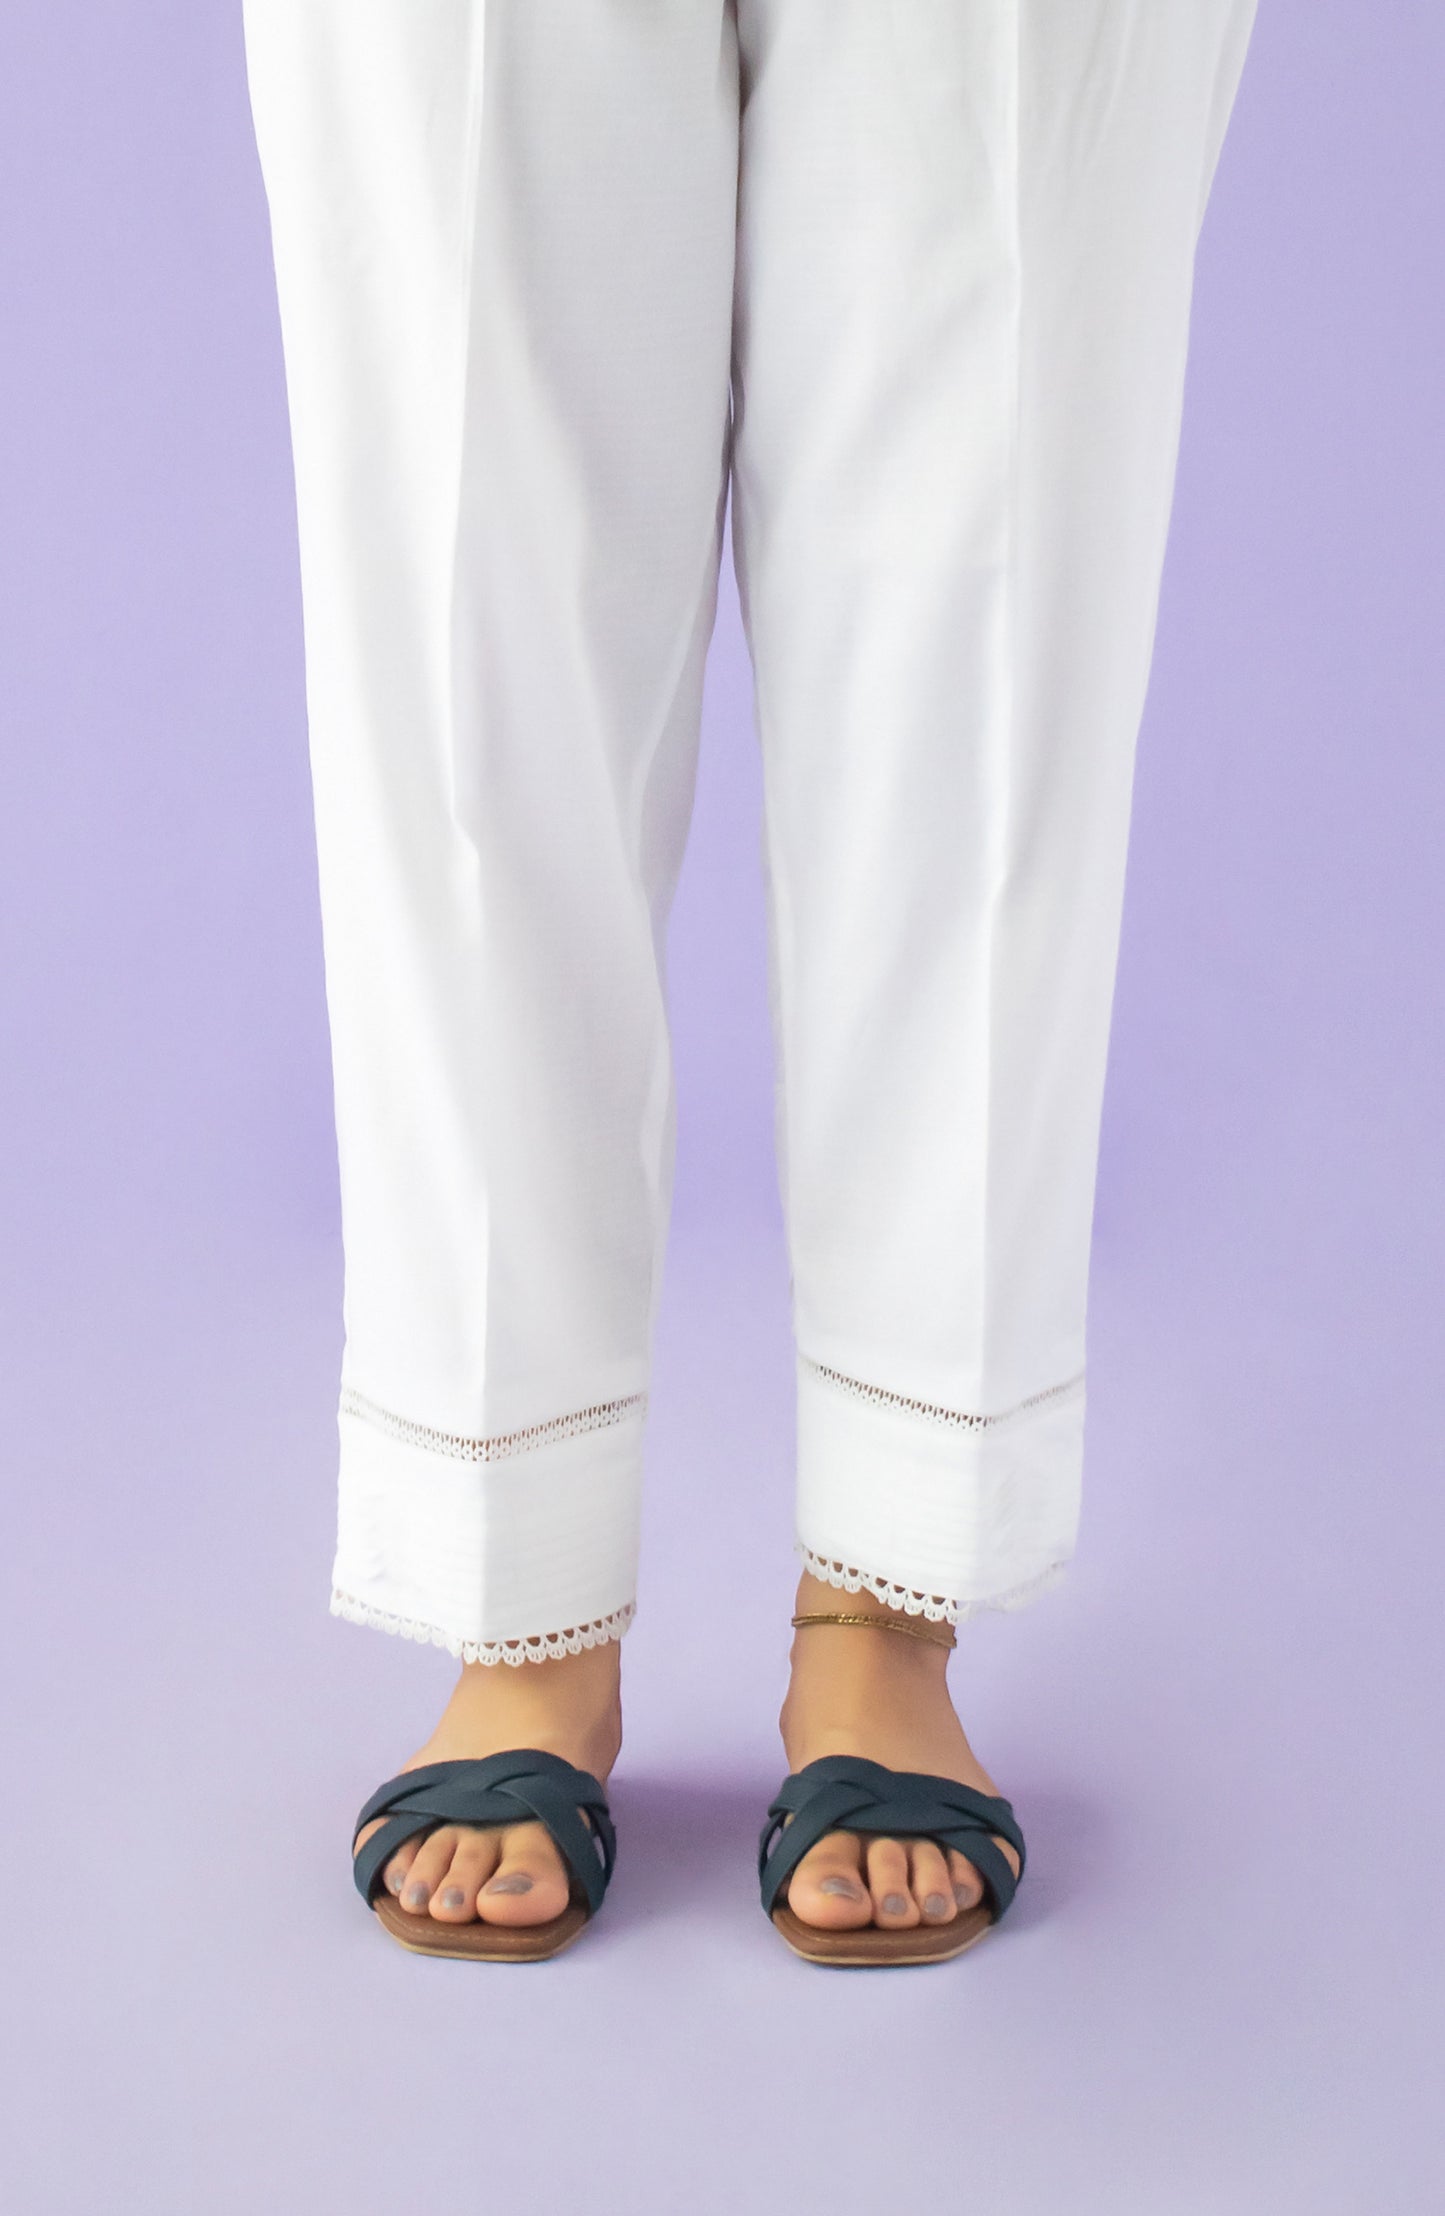 NB-T-PL-23-001 WHITE DOBBY SCTROUSER STITCHED BOTTOMS TROUSER